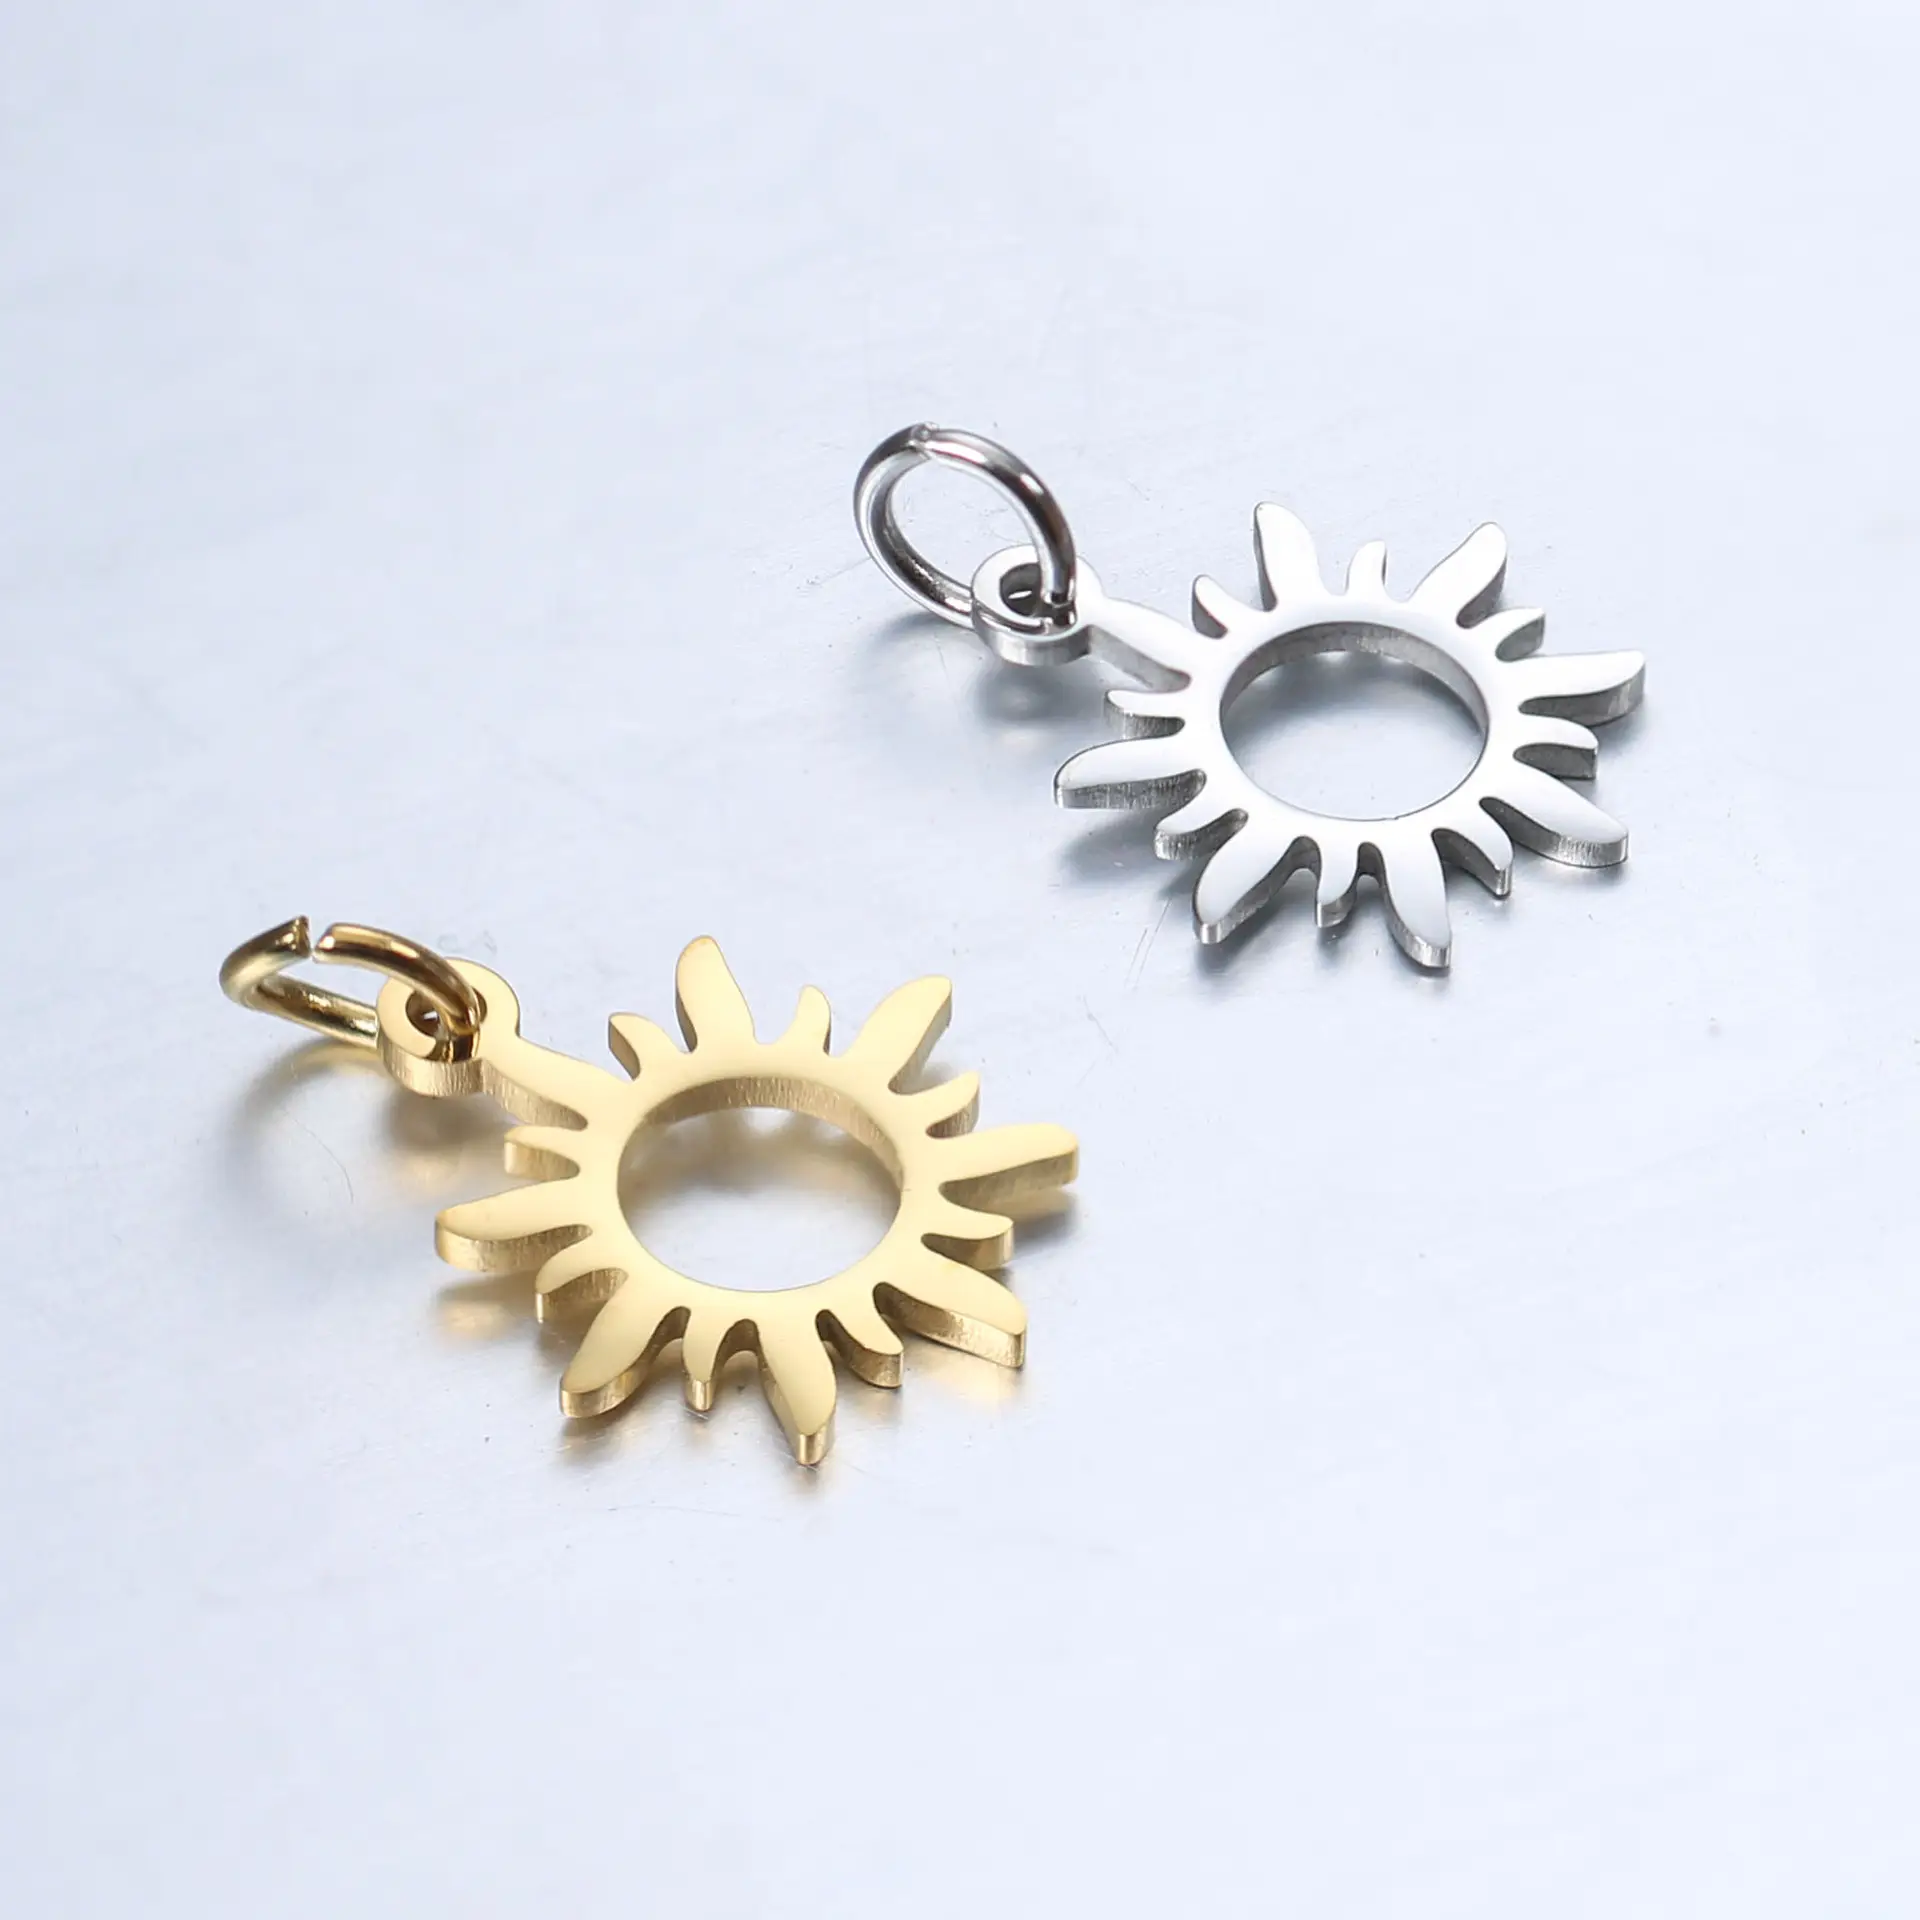 Jewelry Accessories Waterproof Finding Accessories For Jewelry Metal Plated Gold Stainless Steel Sun Pendant Charm